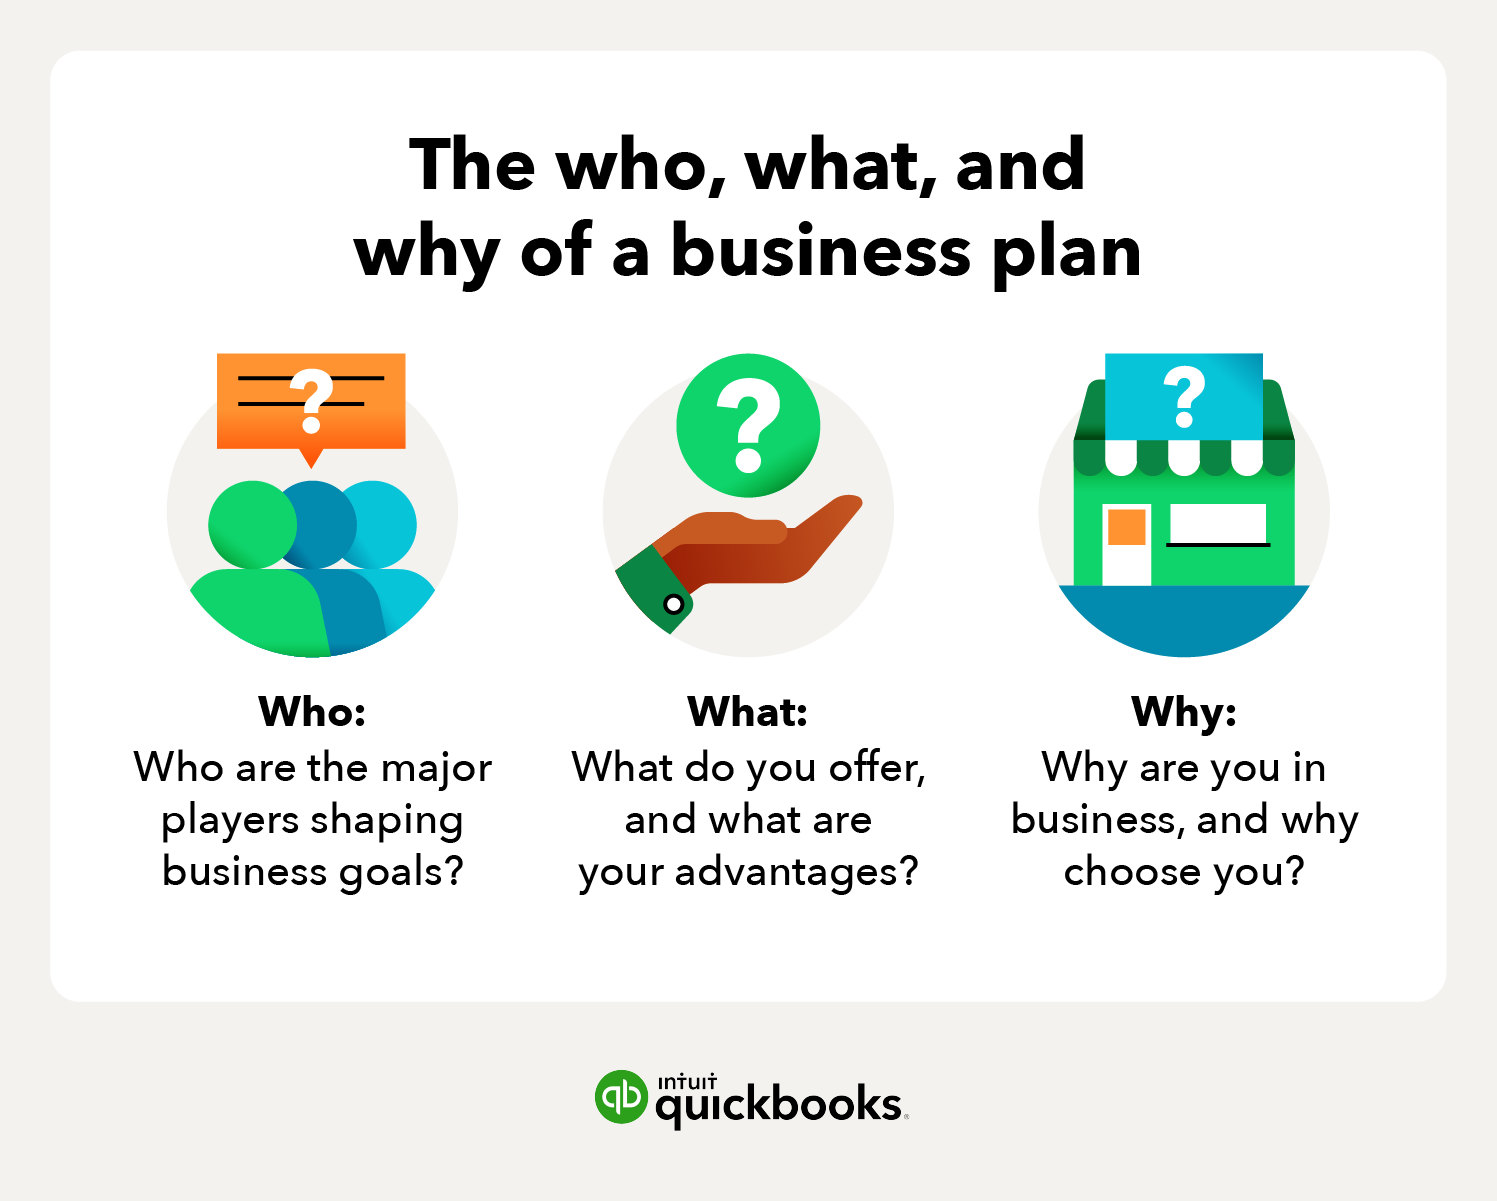 Three W’s of a business plan